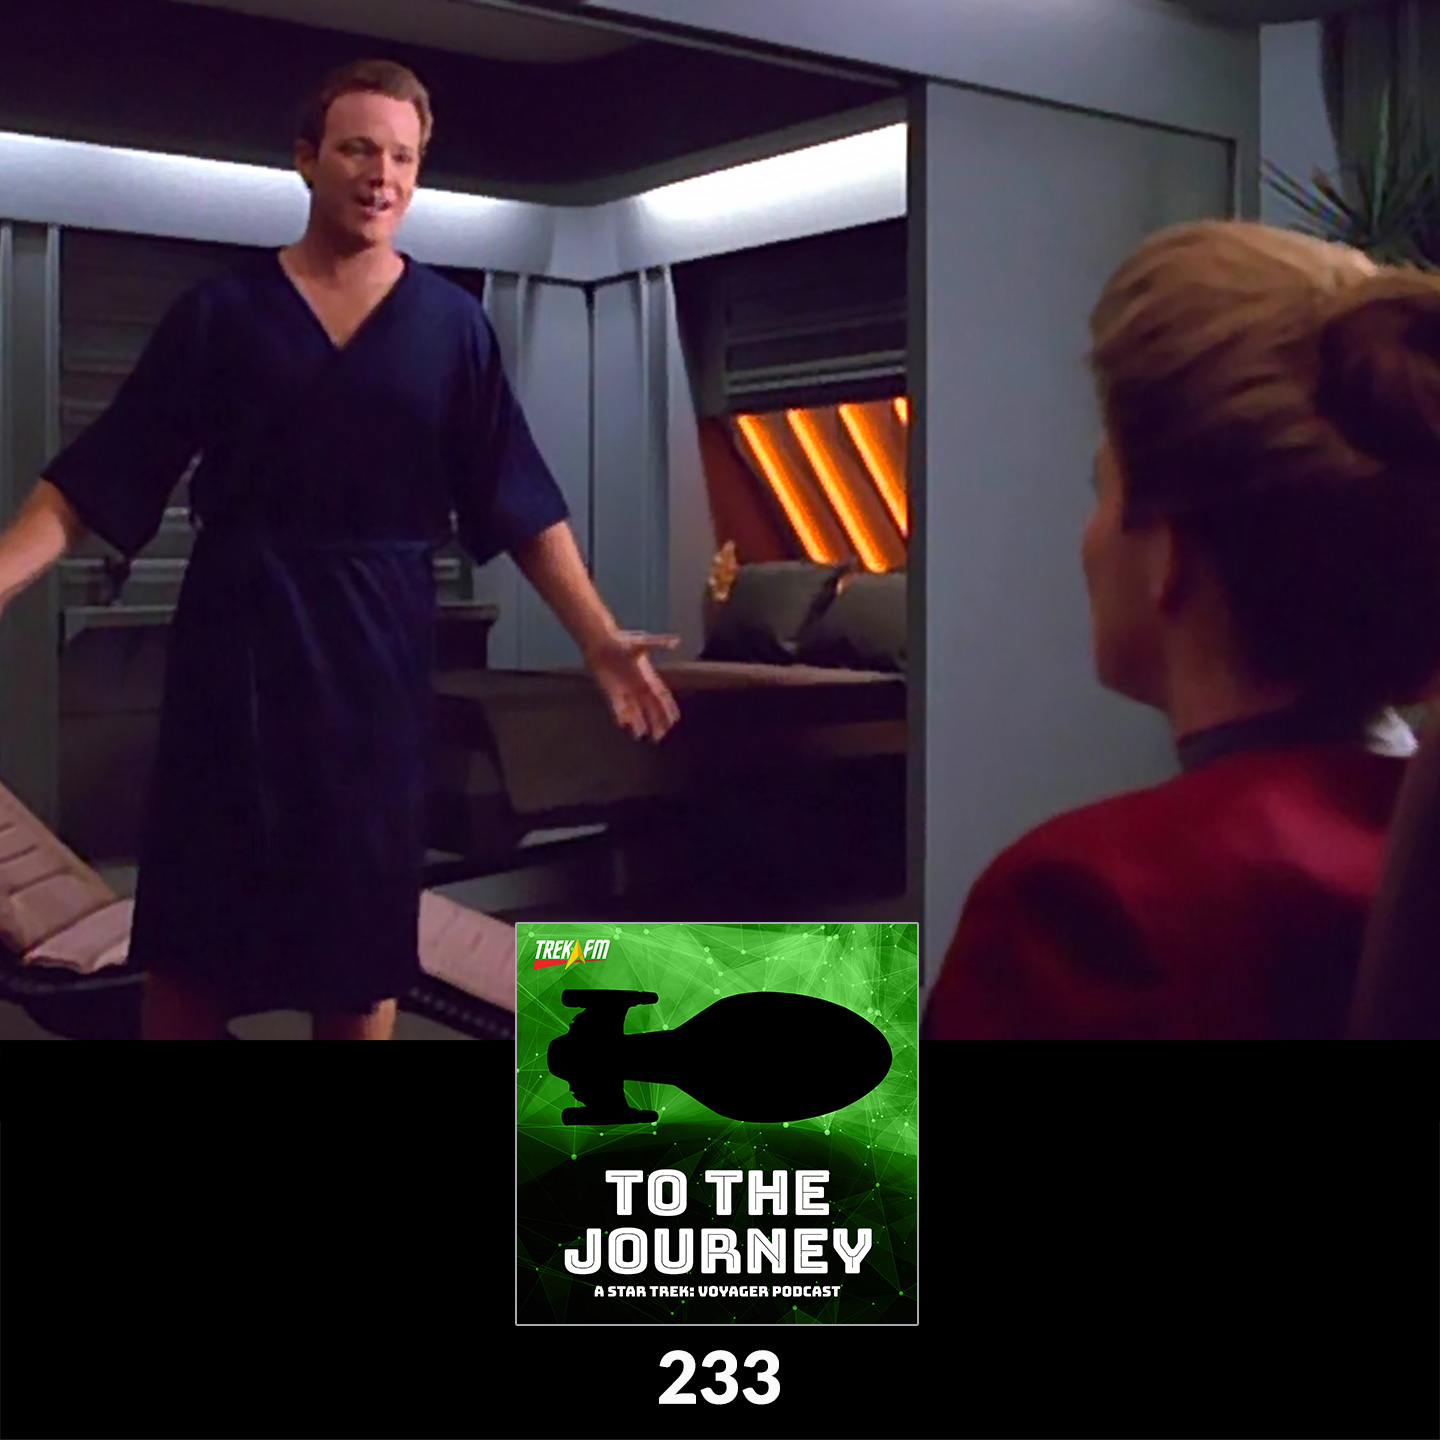 To The Journey 233: All I Got Was This Lousy T-Shirt - Defending "Threshold."